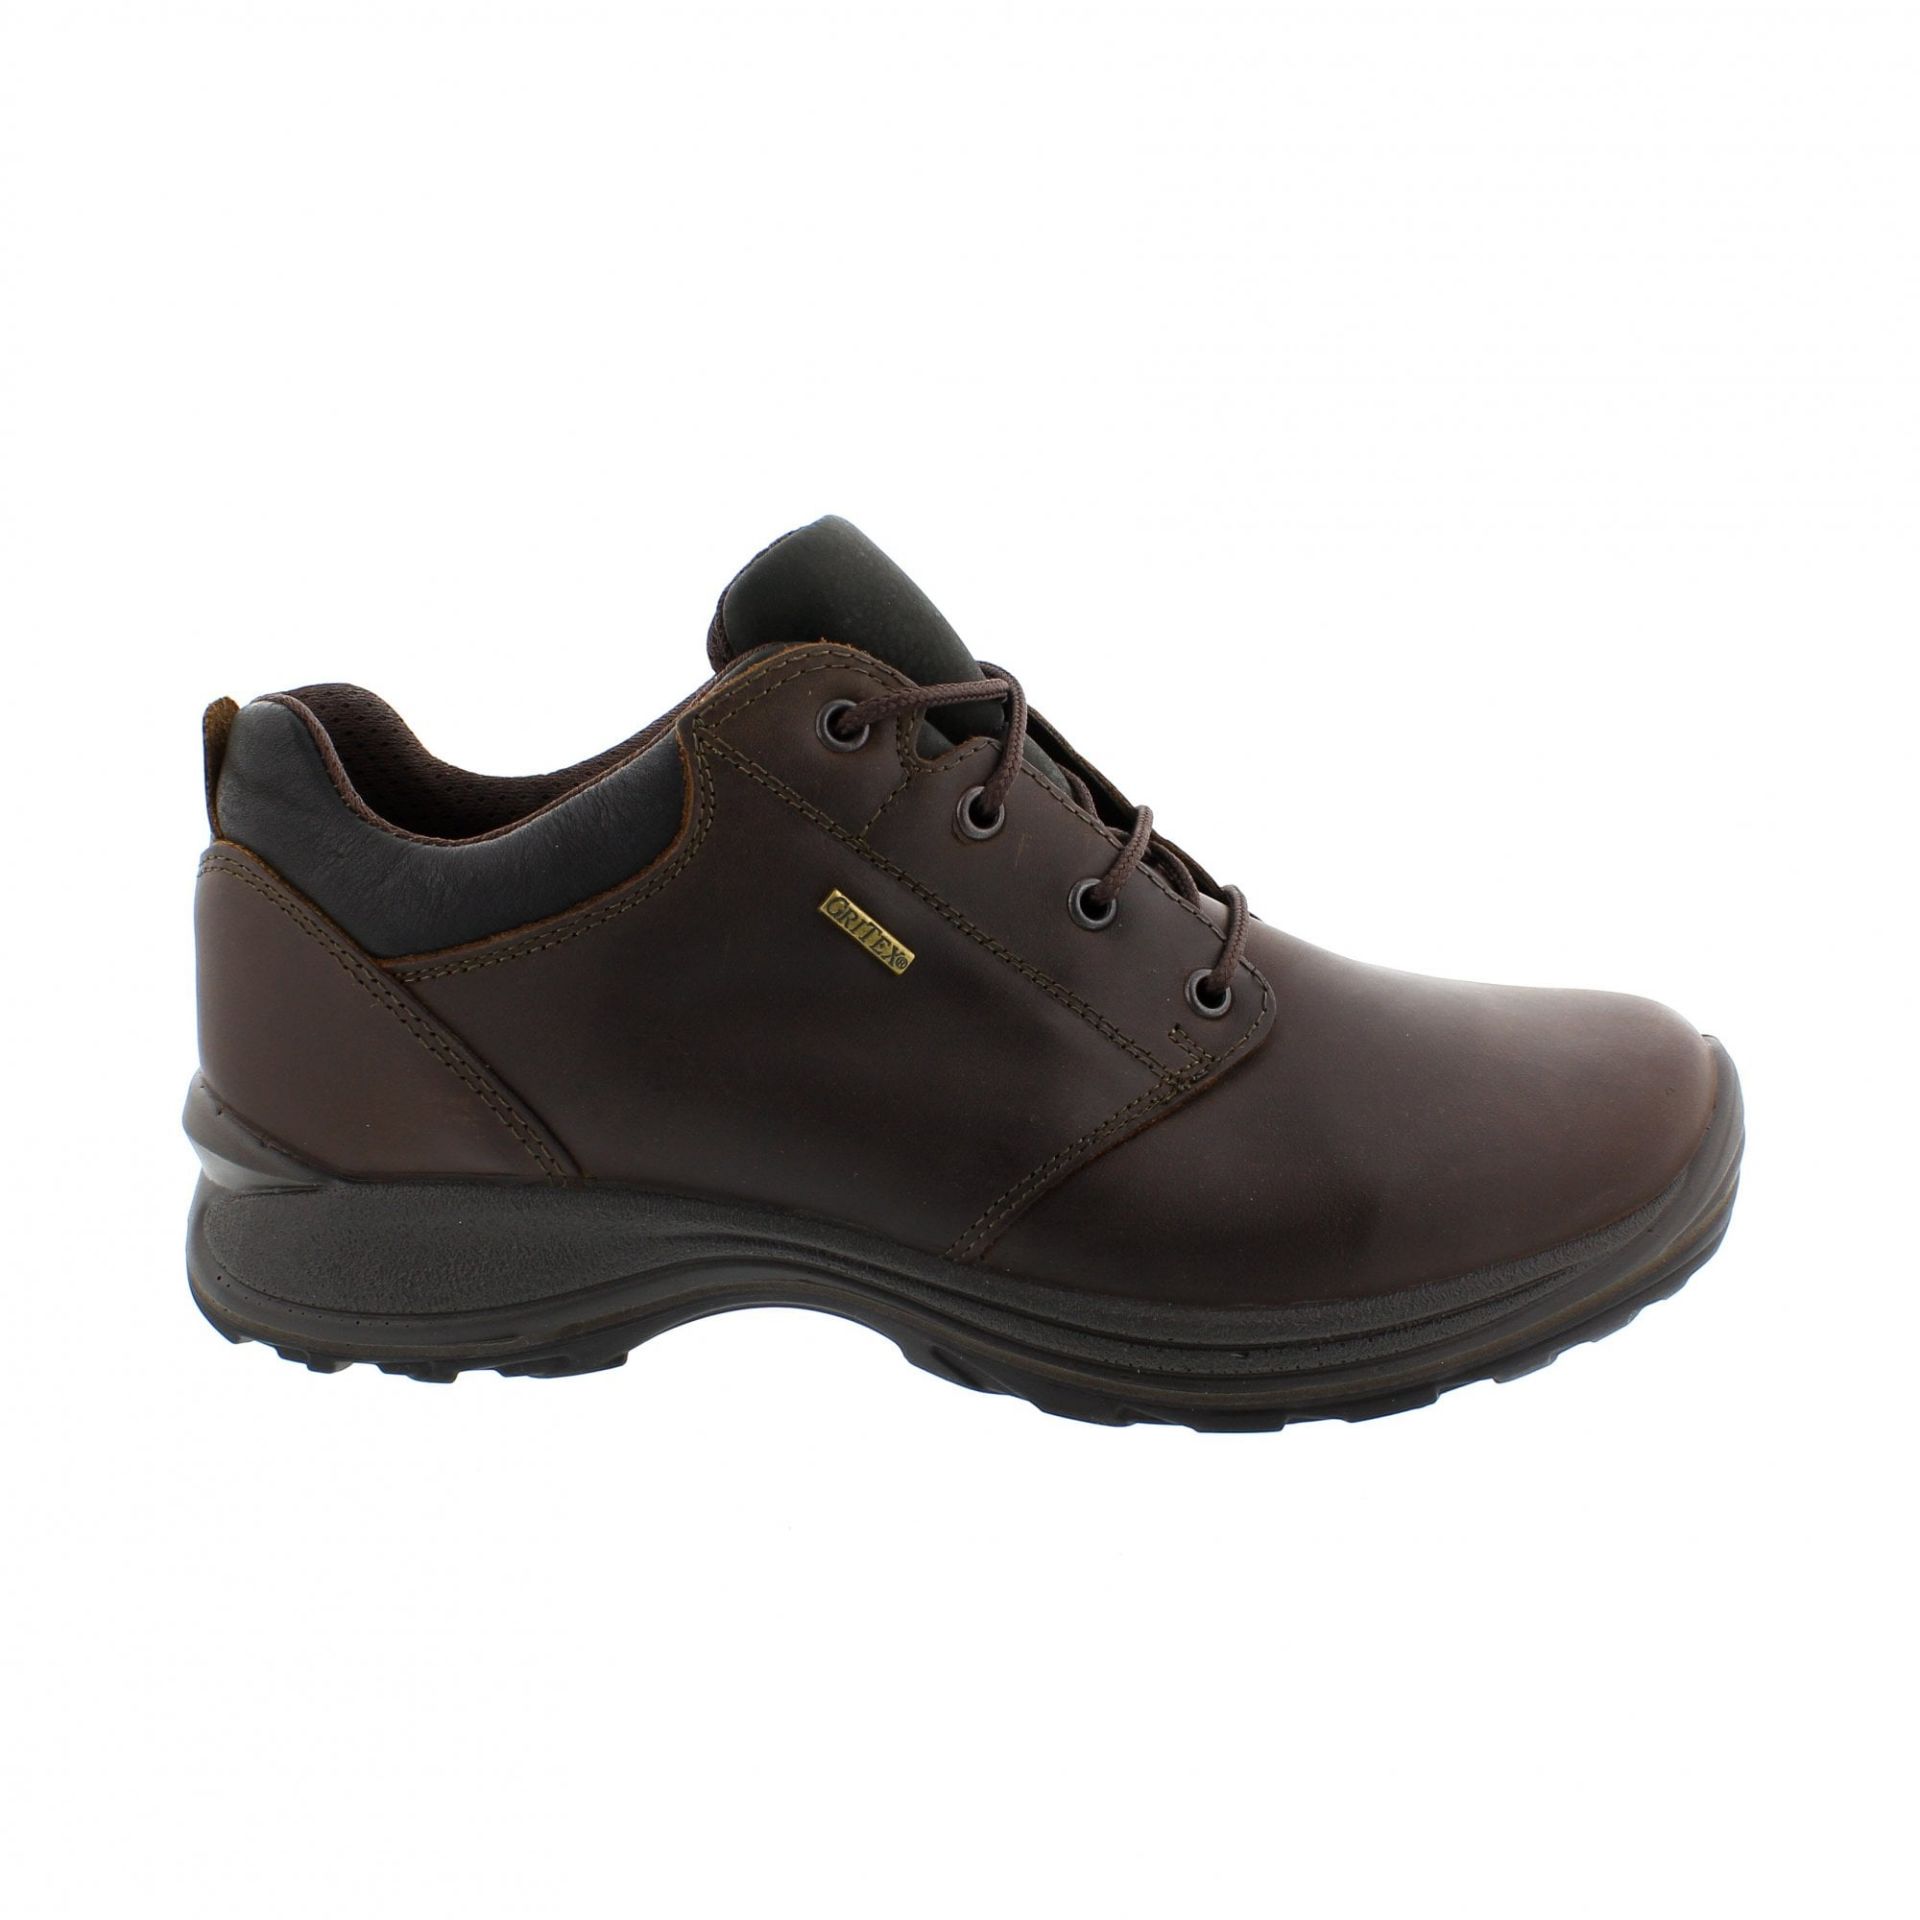 1 x Pair of Men's Grisport Brown Leather GriTex Shoes - Rogerson Footwear - Brand New and Boxed - - Image 5 of 9